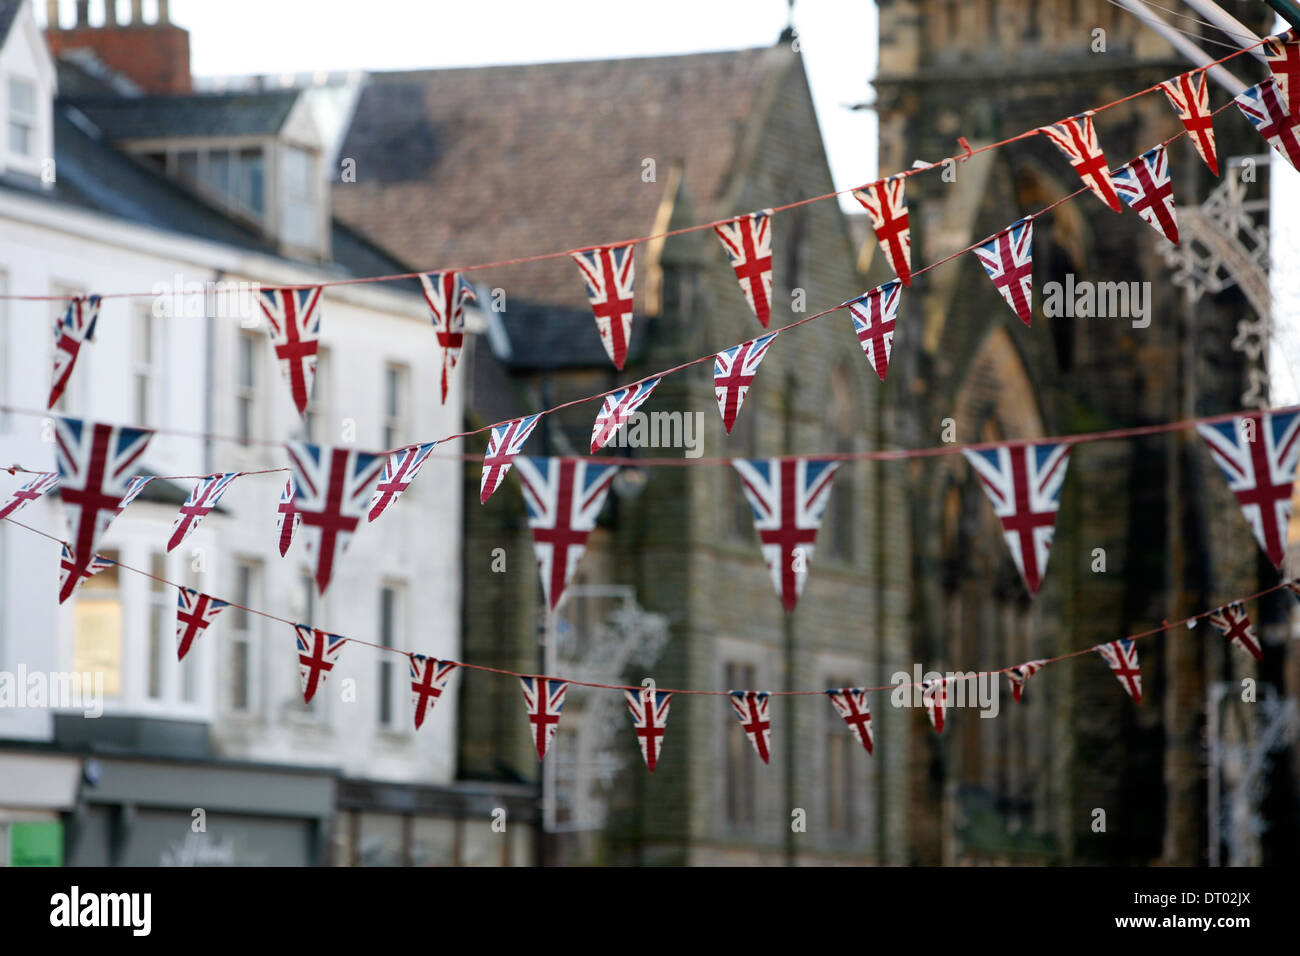 Union Flag buntings in Morpeth Tynemouth. Stock Photo